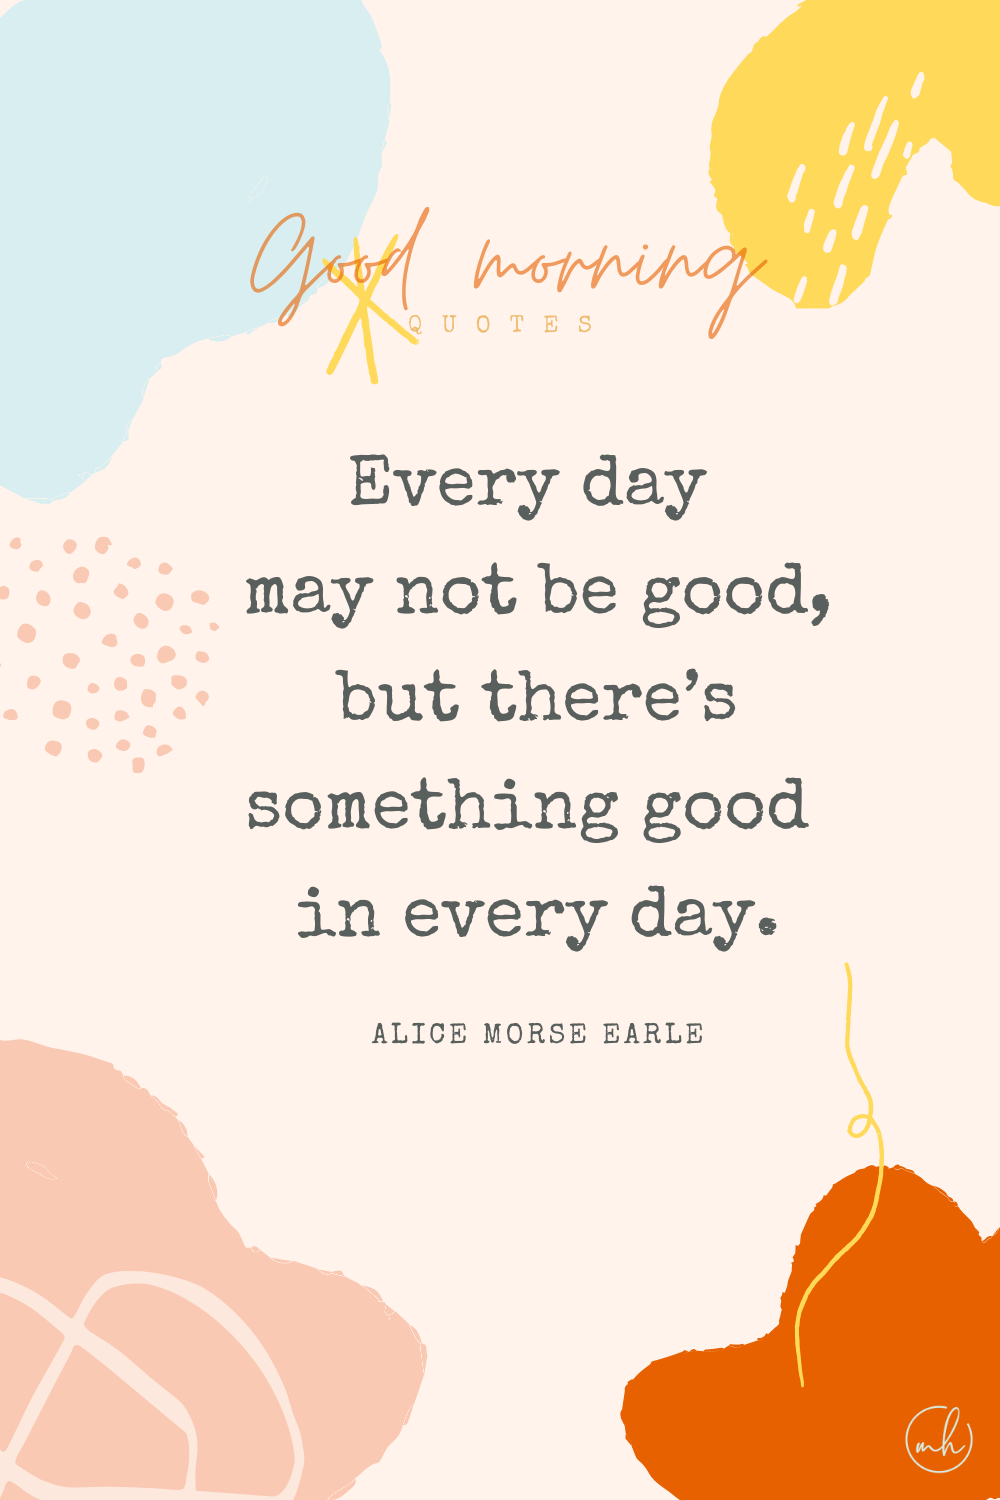 "Every day may not be good, but there’s something good in every day." – Alice Morse Earle